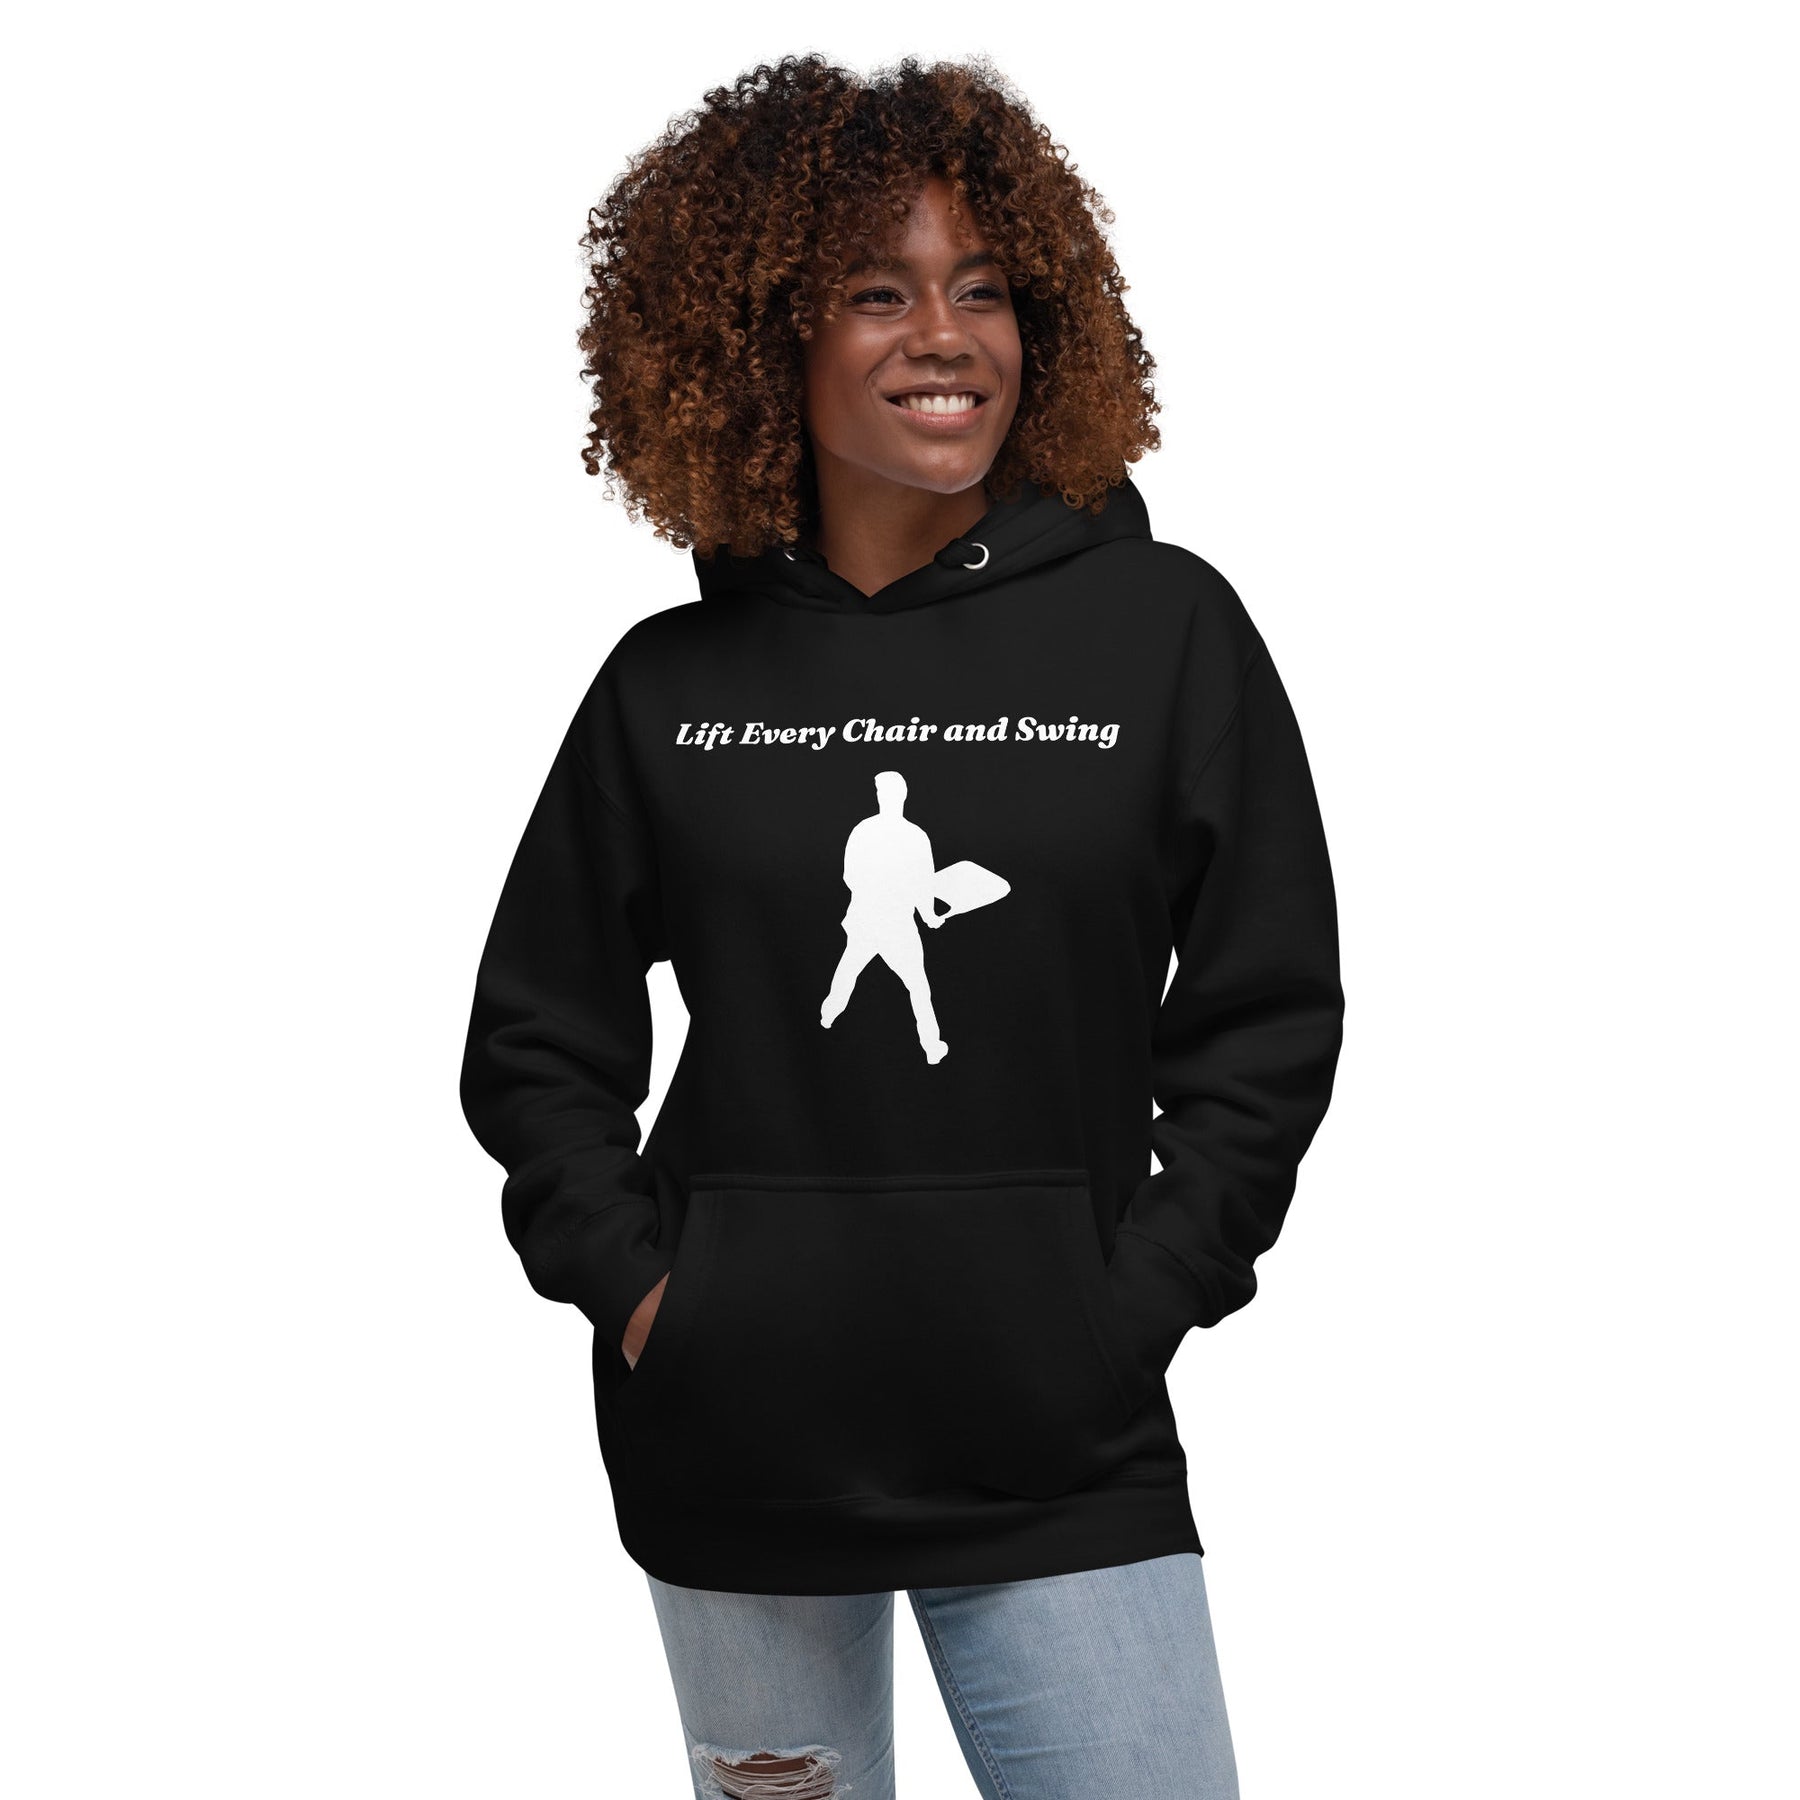 Lift Every Chair And Swing Unisex Hoodie